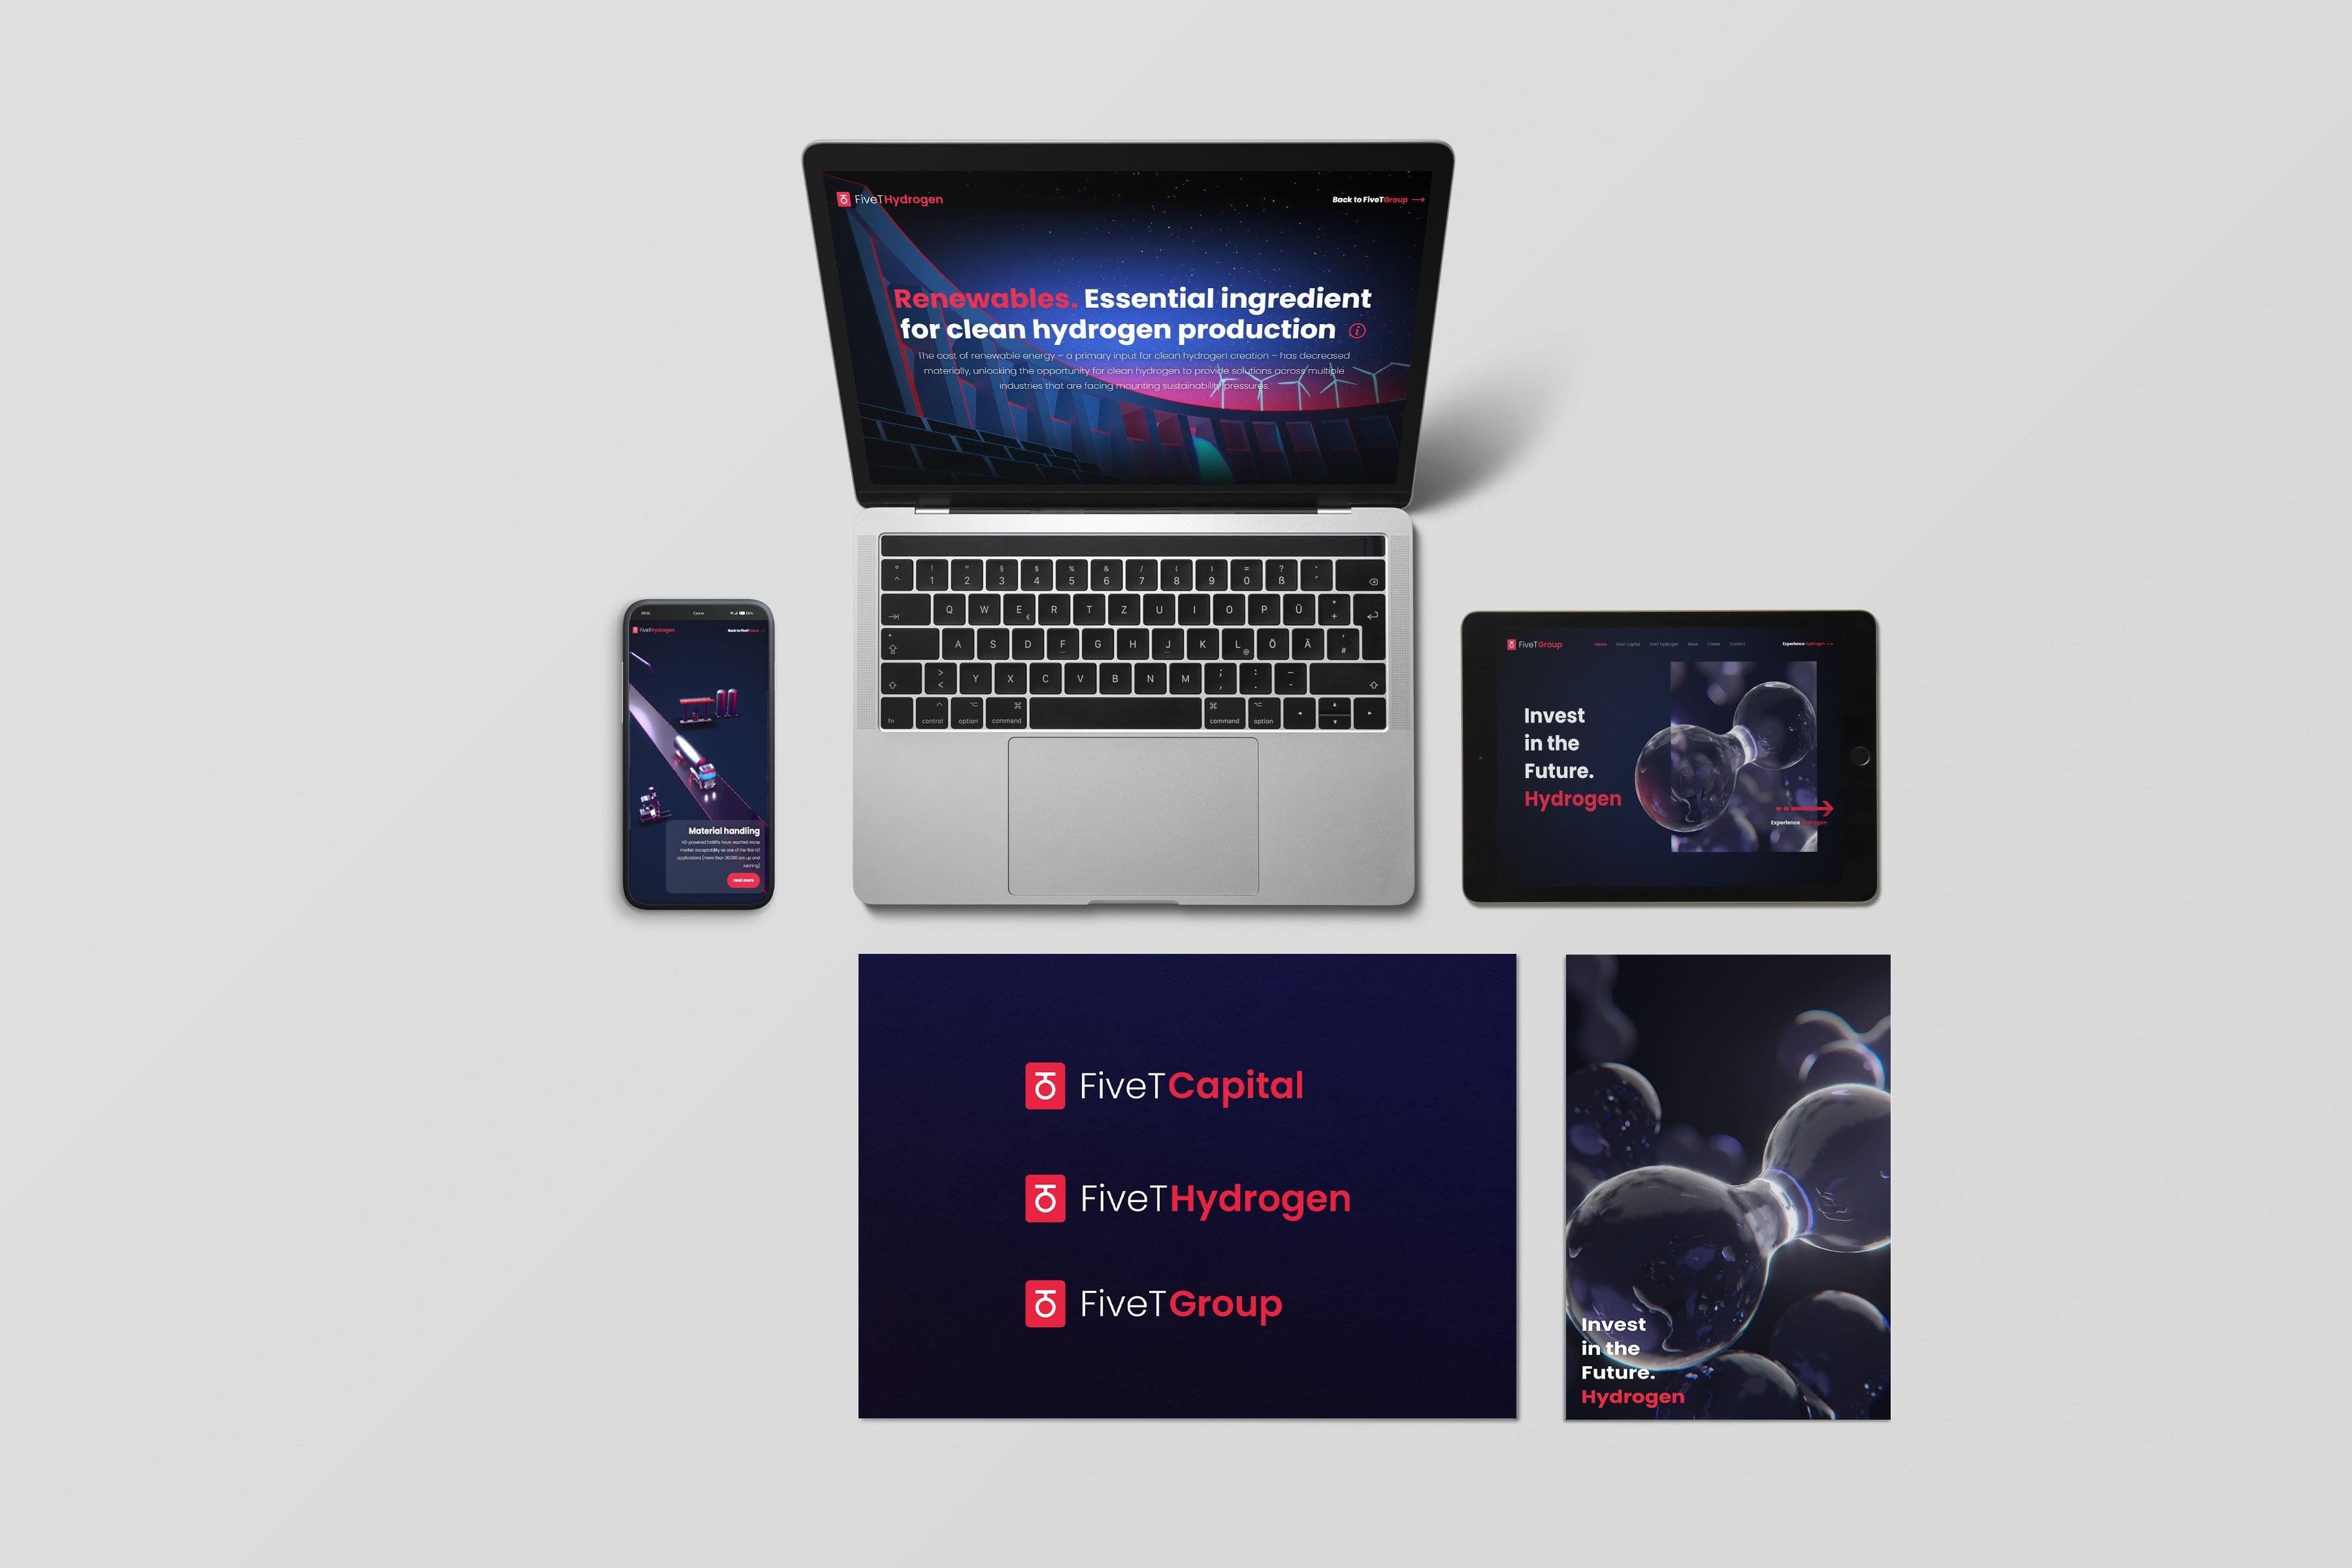 This mock up image shows FiveT branding designed by Sensu on multiple devices